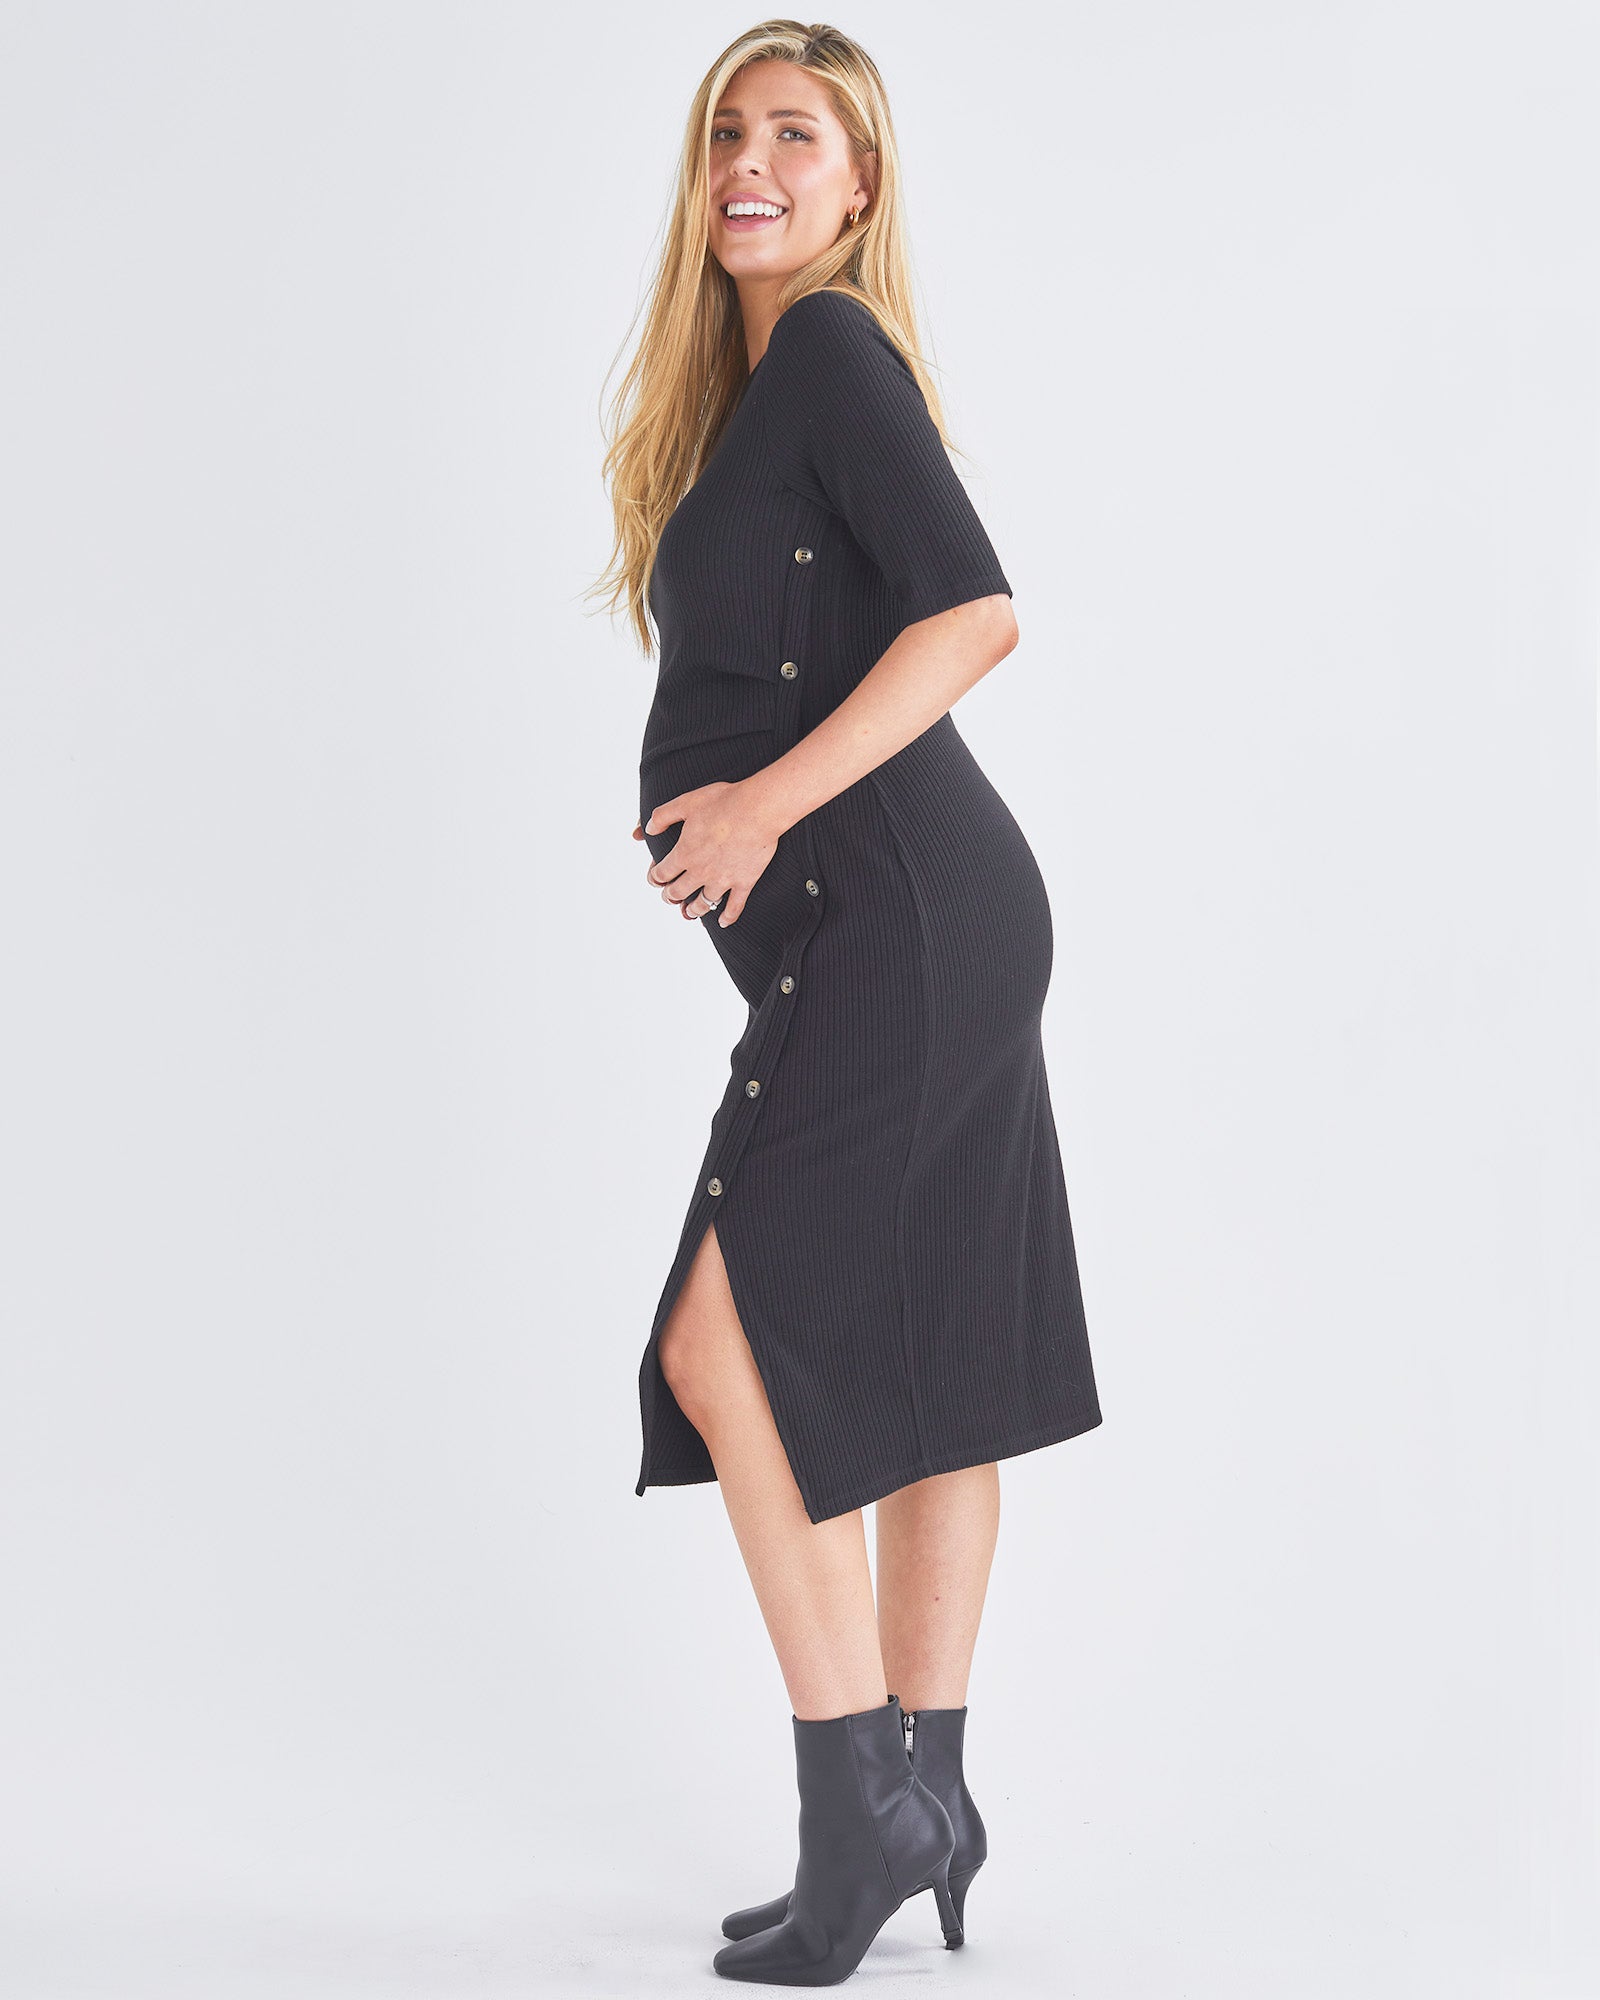 Side View - A Pregnant Woman Wearing Elegant Maternity Black Bodycon Dress from Angel Maternity